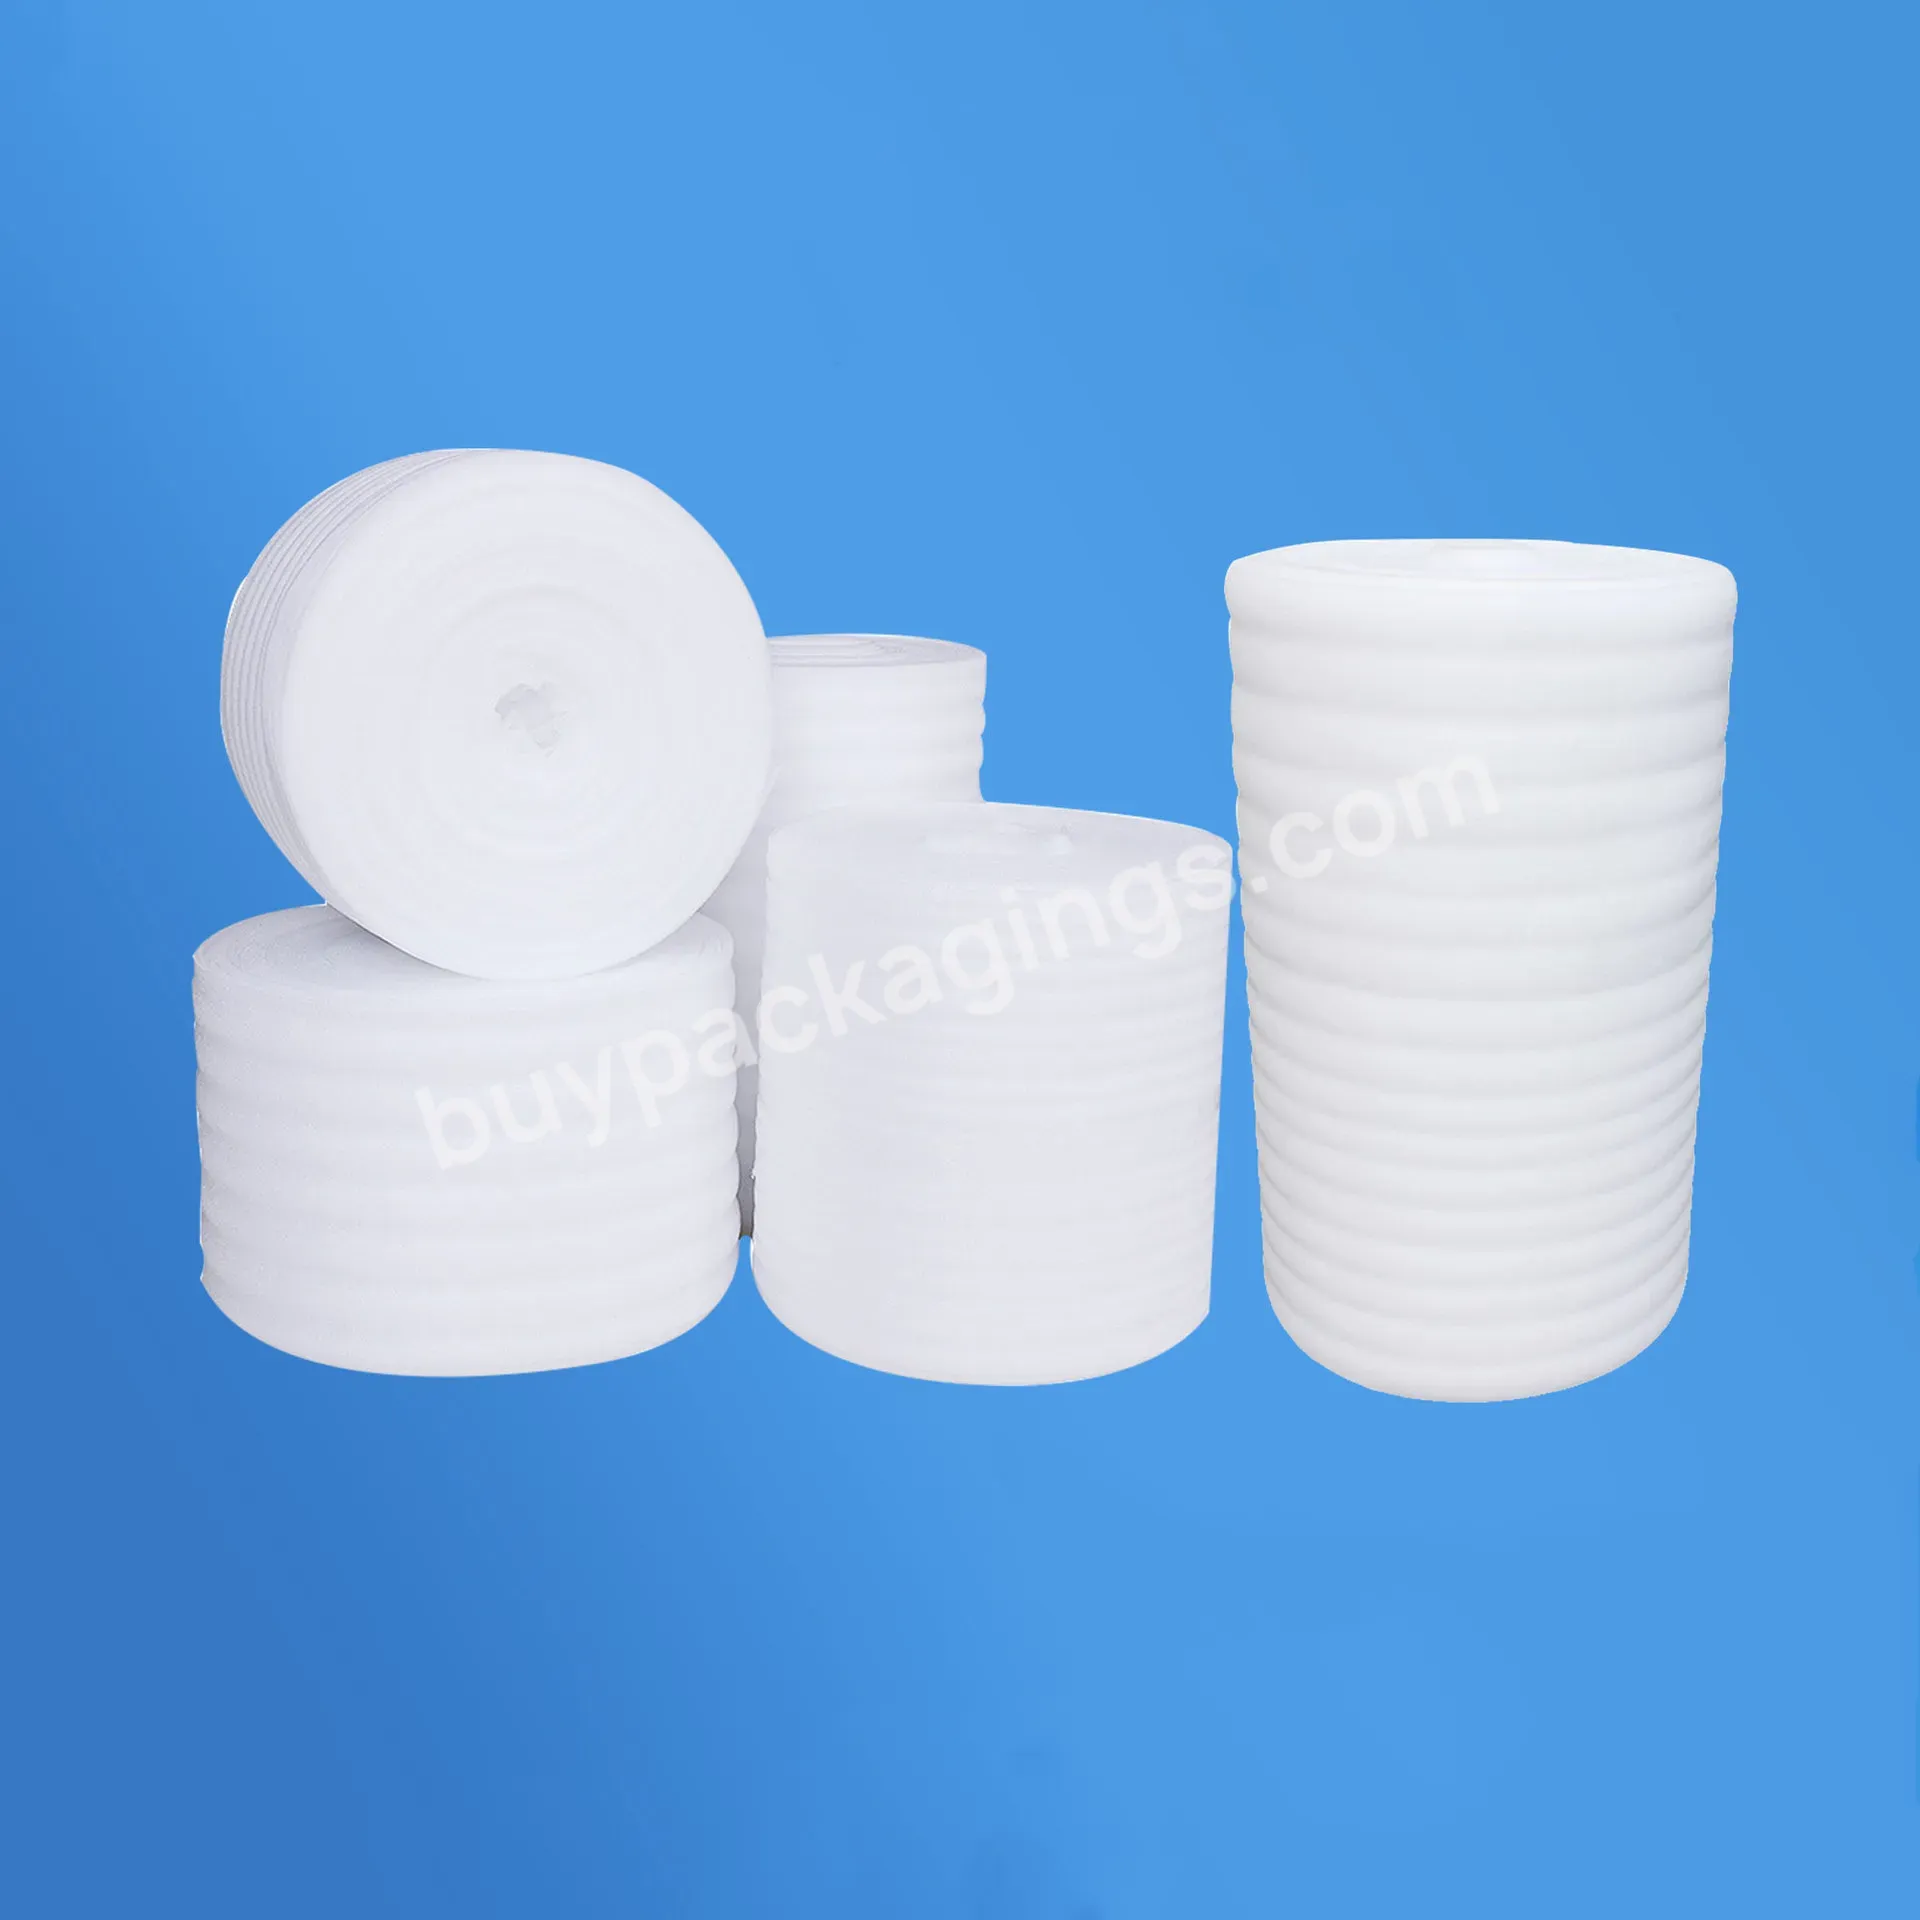 Waterproof Recyclable Logistics Shock Absorption Packaging Epe Foam Coil Polyurethane Foams Pack Material - Buy Polystyrene Foam Roll,Degradable Packaging Materials,Composite Packaging Materialssoap Packaging Materials.